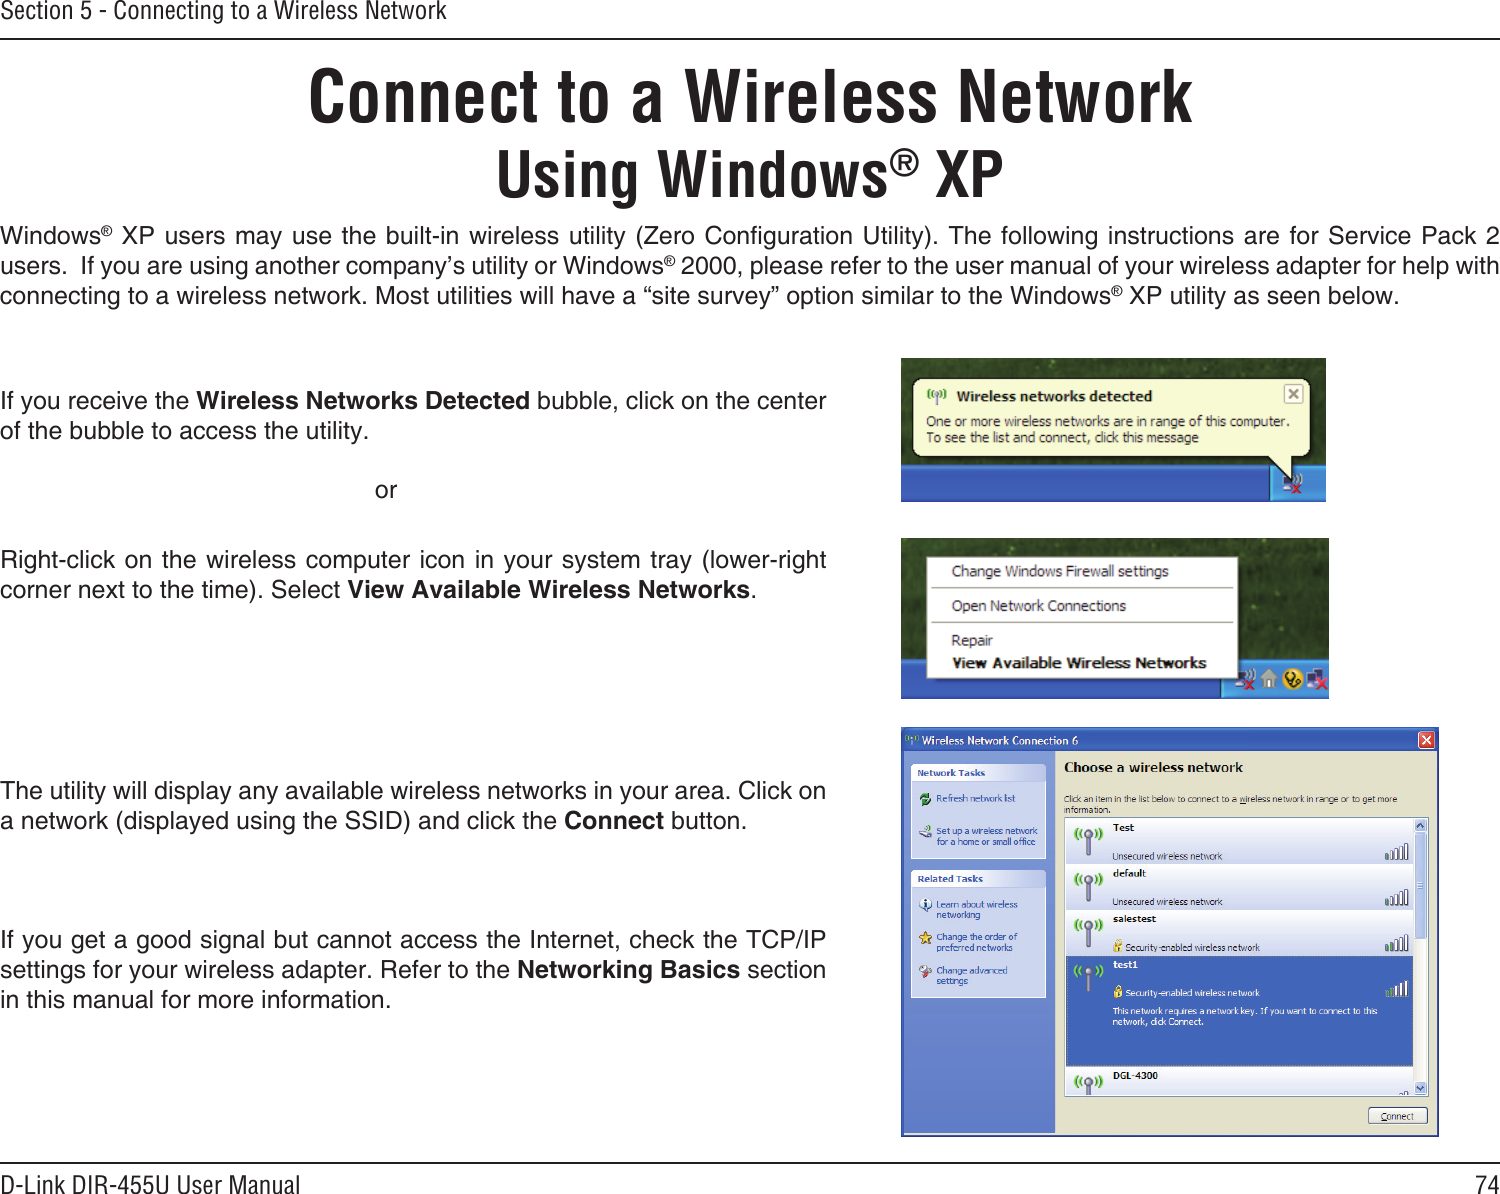 74D-Link DIR-455U User ManualSection 5 - Connecting to a Wireless NetworkConnect to a Wireless NetworkUsing Windows® XPWindows® XP users may use the built-in wireless utility (Zero Conguration Utility). The following instructions are for  Service Pack 2 users.  If you are using another company’s utility or Windows® 2000, please refer to the user manual of your wireless adapter for help with connecting to a wireless network. Most utilities will have a “site survey” option similar to the Windows® XP utility as seen below.Right-click on the wireless computer icon in your system tray (lower-right corner next to the time). Select View Available Wireless Networks.If you receive the Wireless Networks Detected bubble, click on the center of the bubble to access the utility.     orThe utility will display any available wireless networks in your area. Click on a network (displayed using the SSID) and click the Connect button.If you get a good signal but cannot access the Internet, check the TCP/IP settings for your wireless adapter. Refer to the Networking Basics section in this manual for more information.